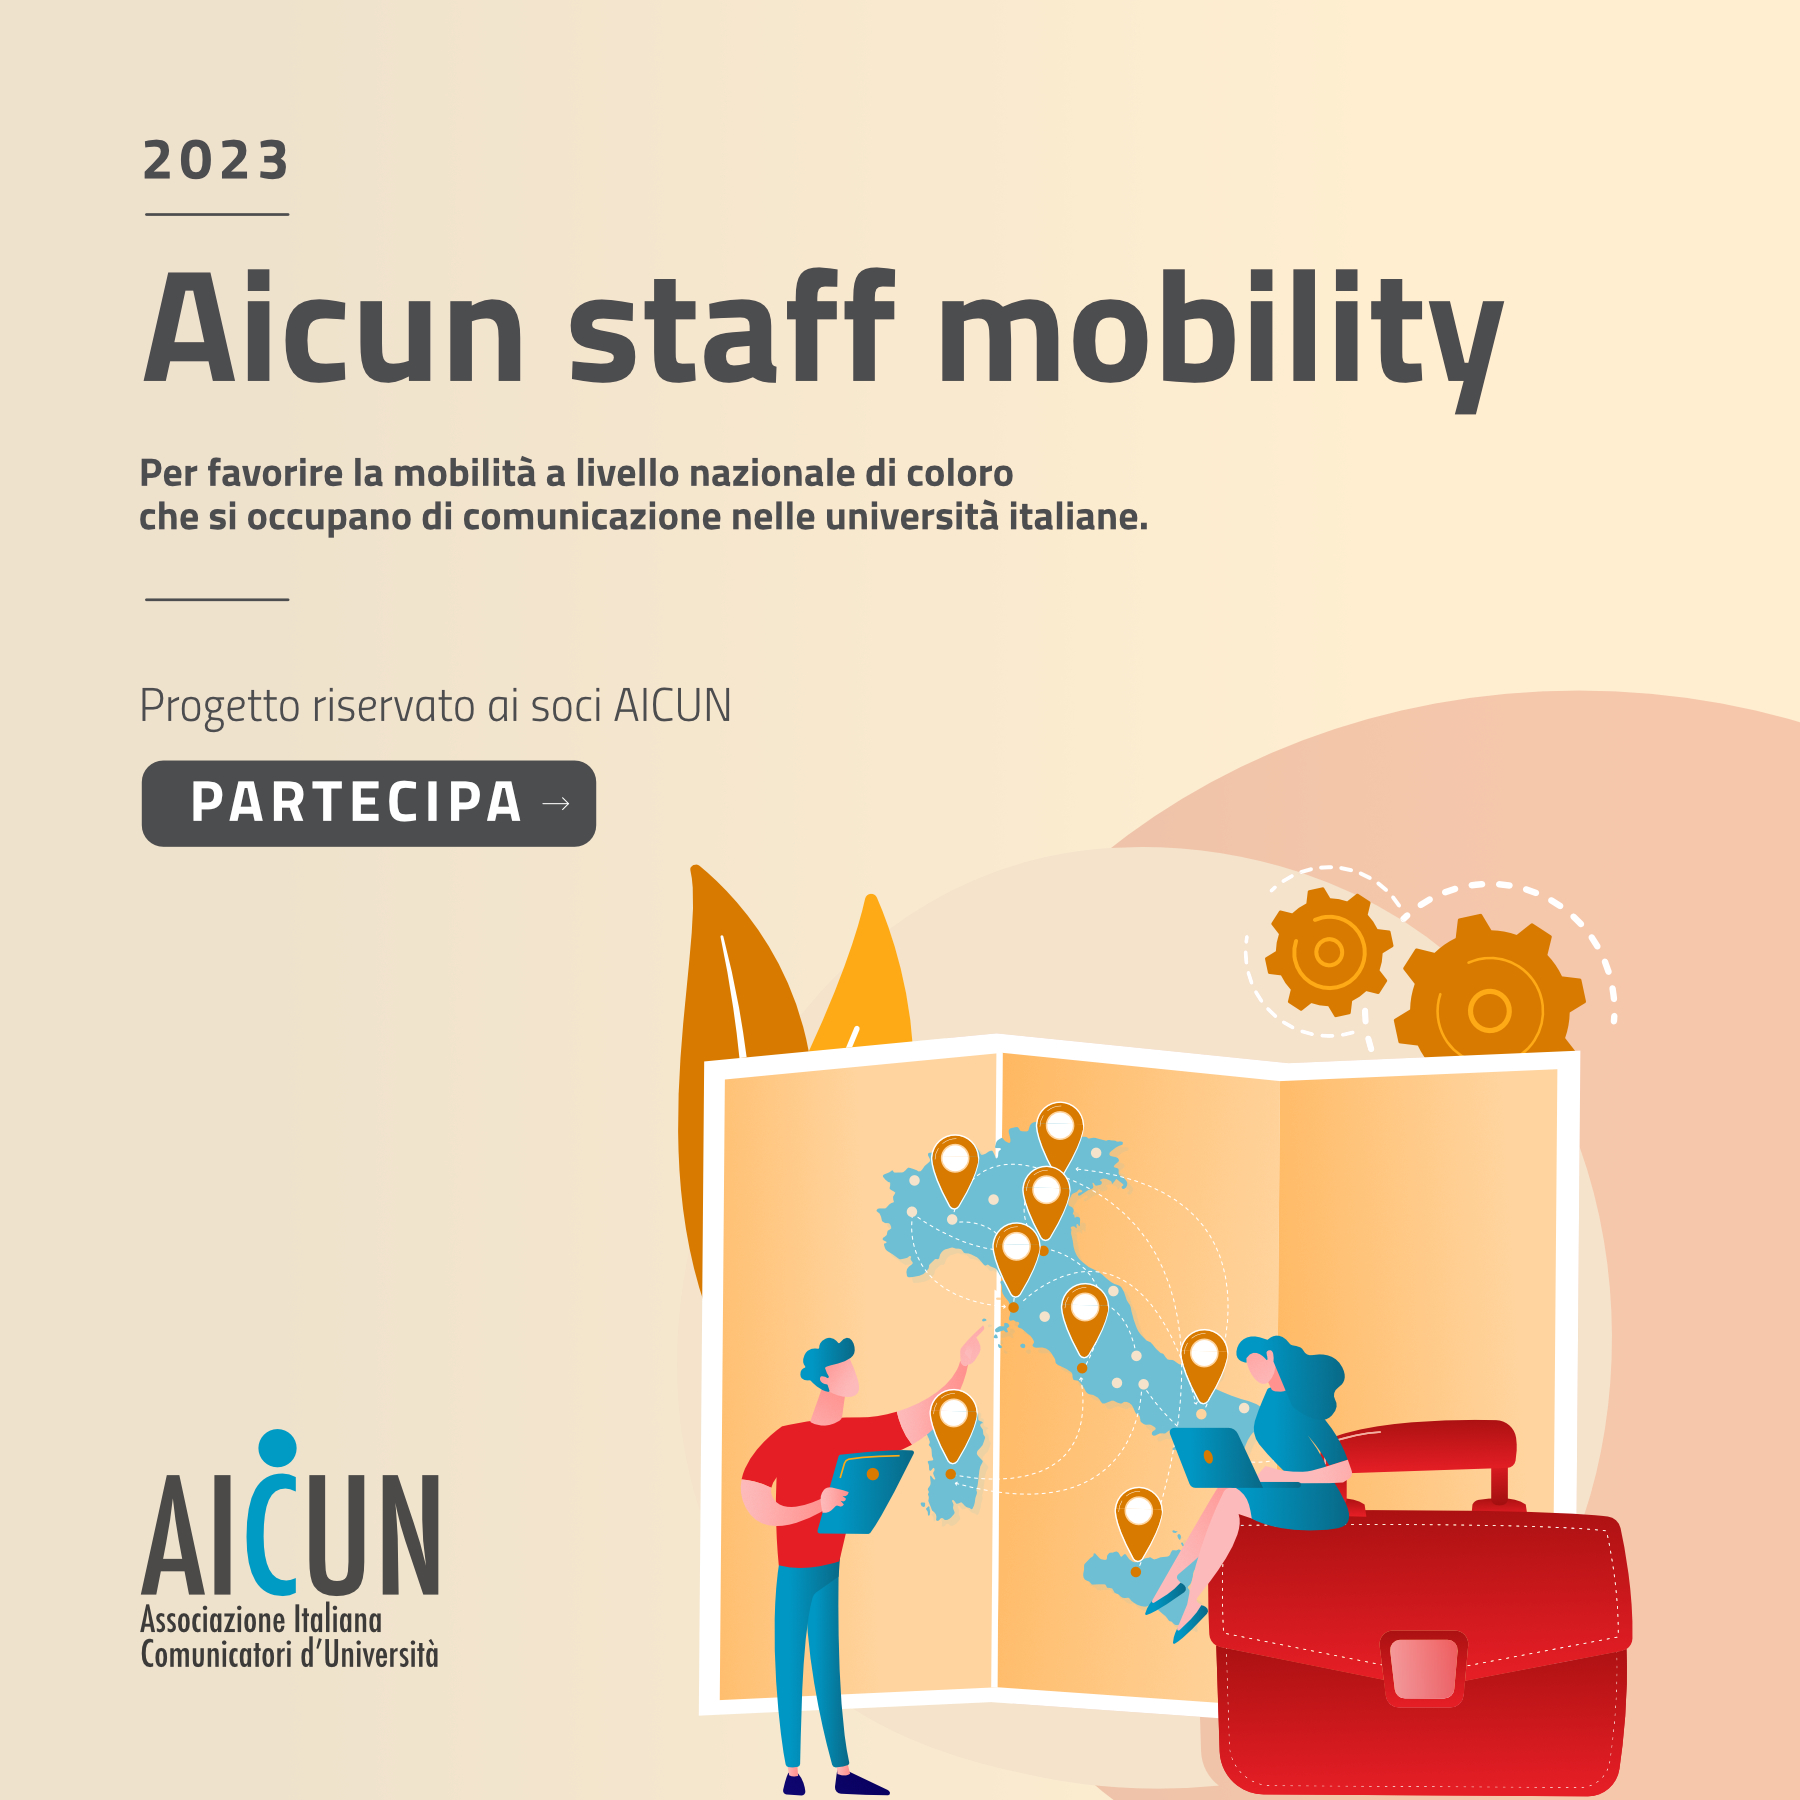 Aicun staff mobility